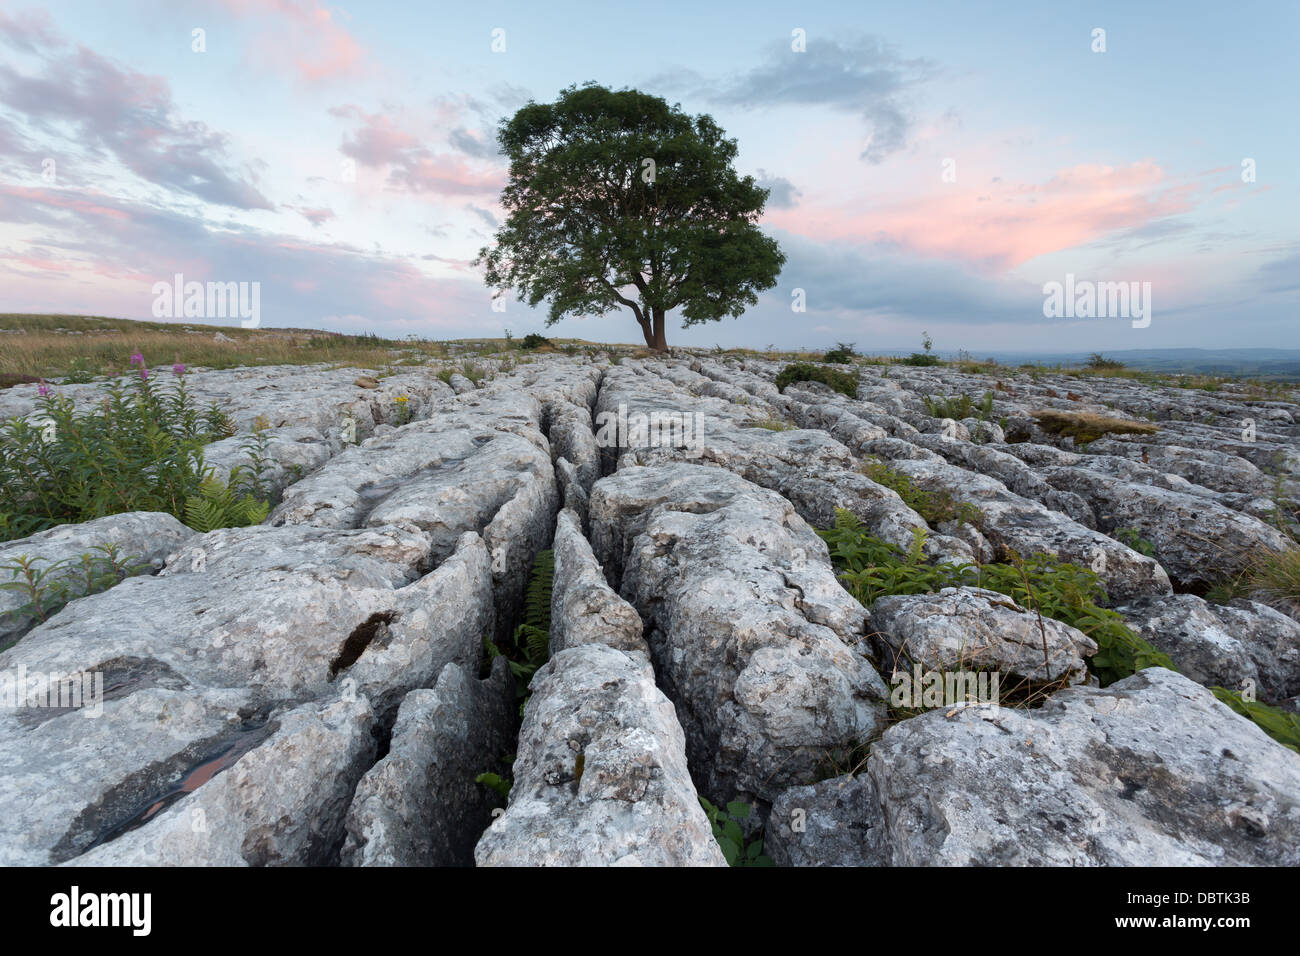 Lonelieness at dawn - the iconic Malham Ash growing through the limestone pavement in the Yorkshire Dales National Park Stock Photo